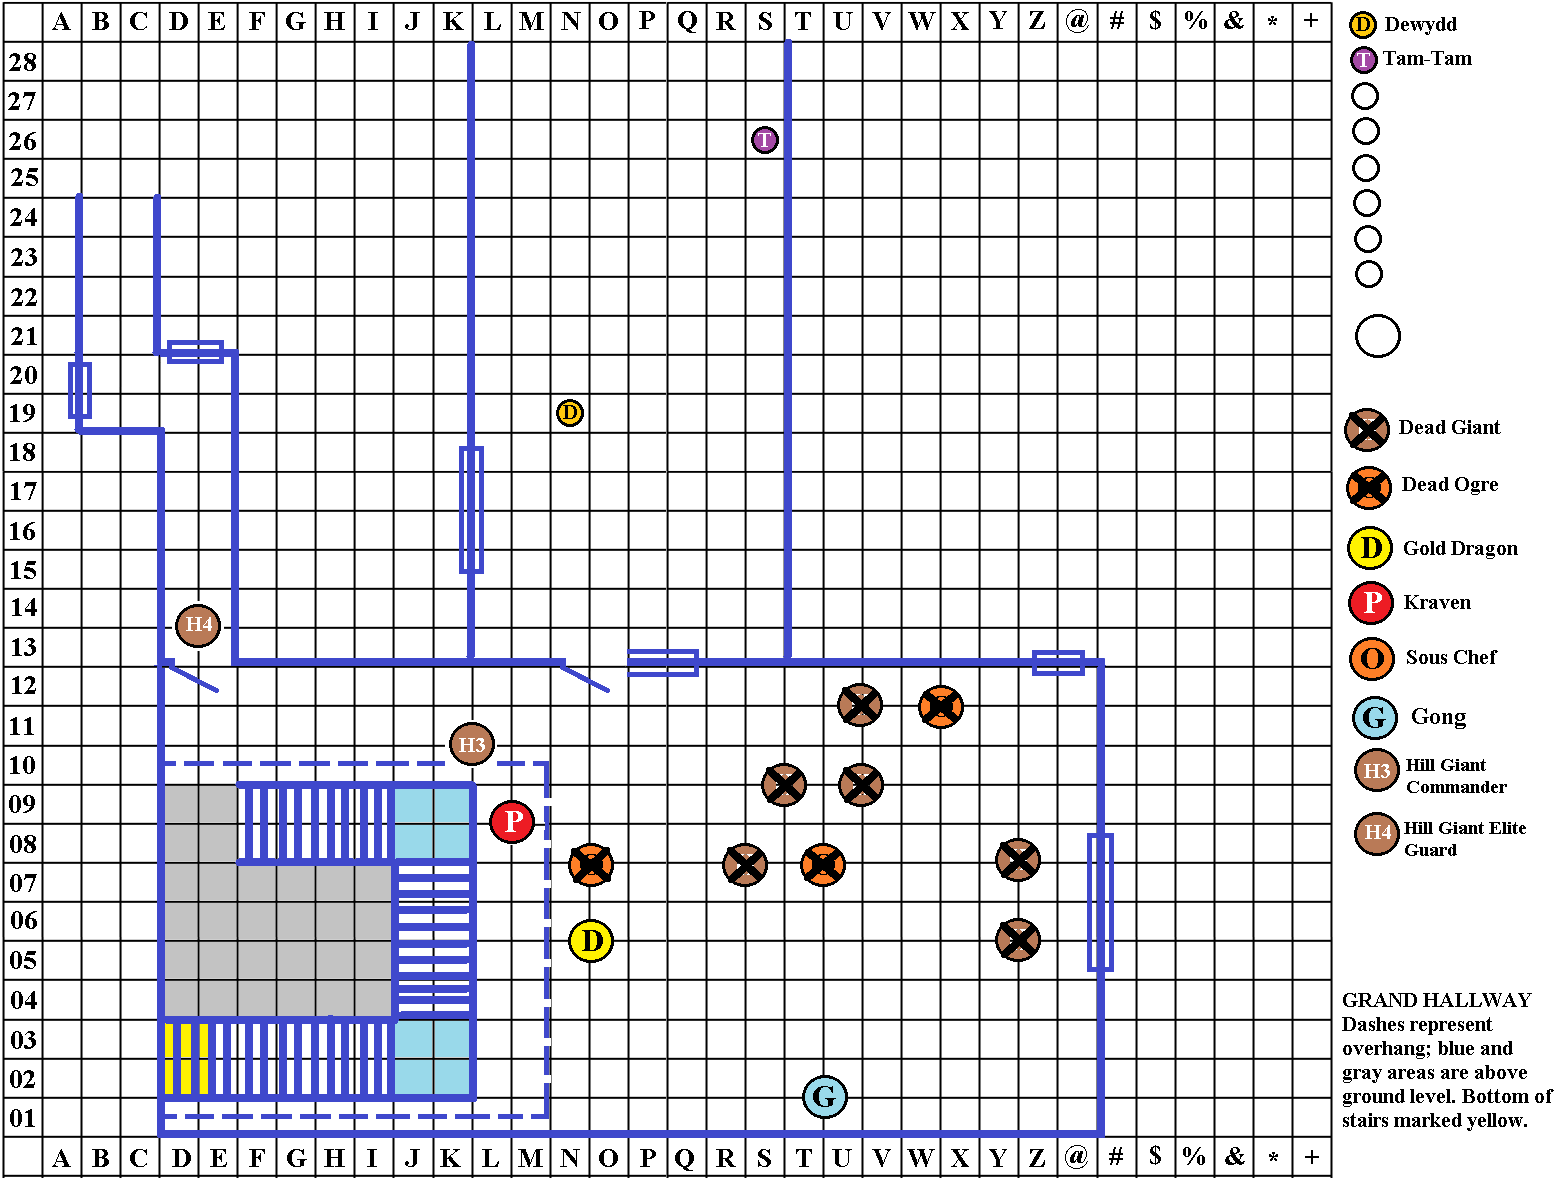 00-The-Grand-Hallway-Base-Map-01c.png